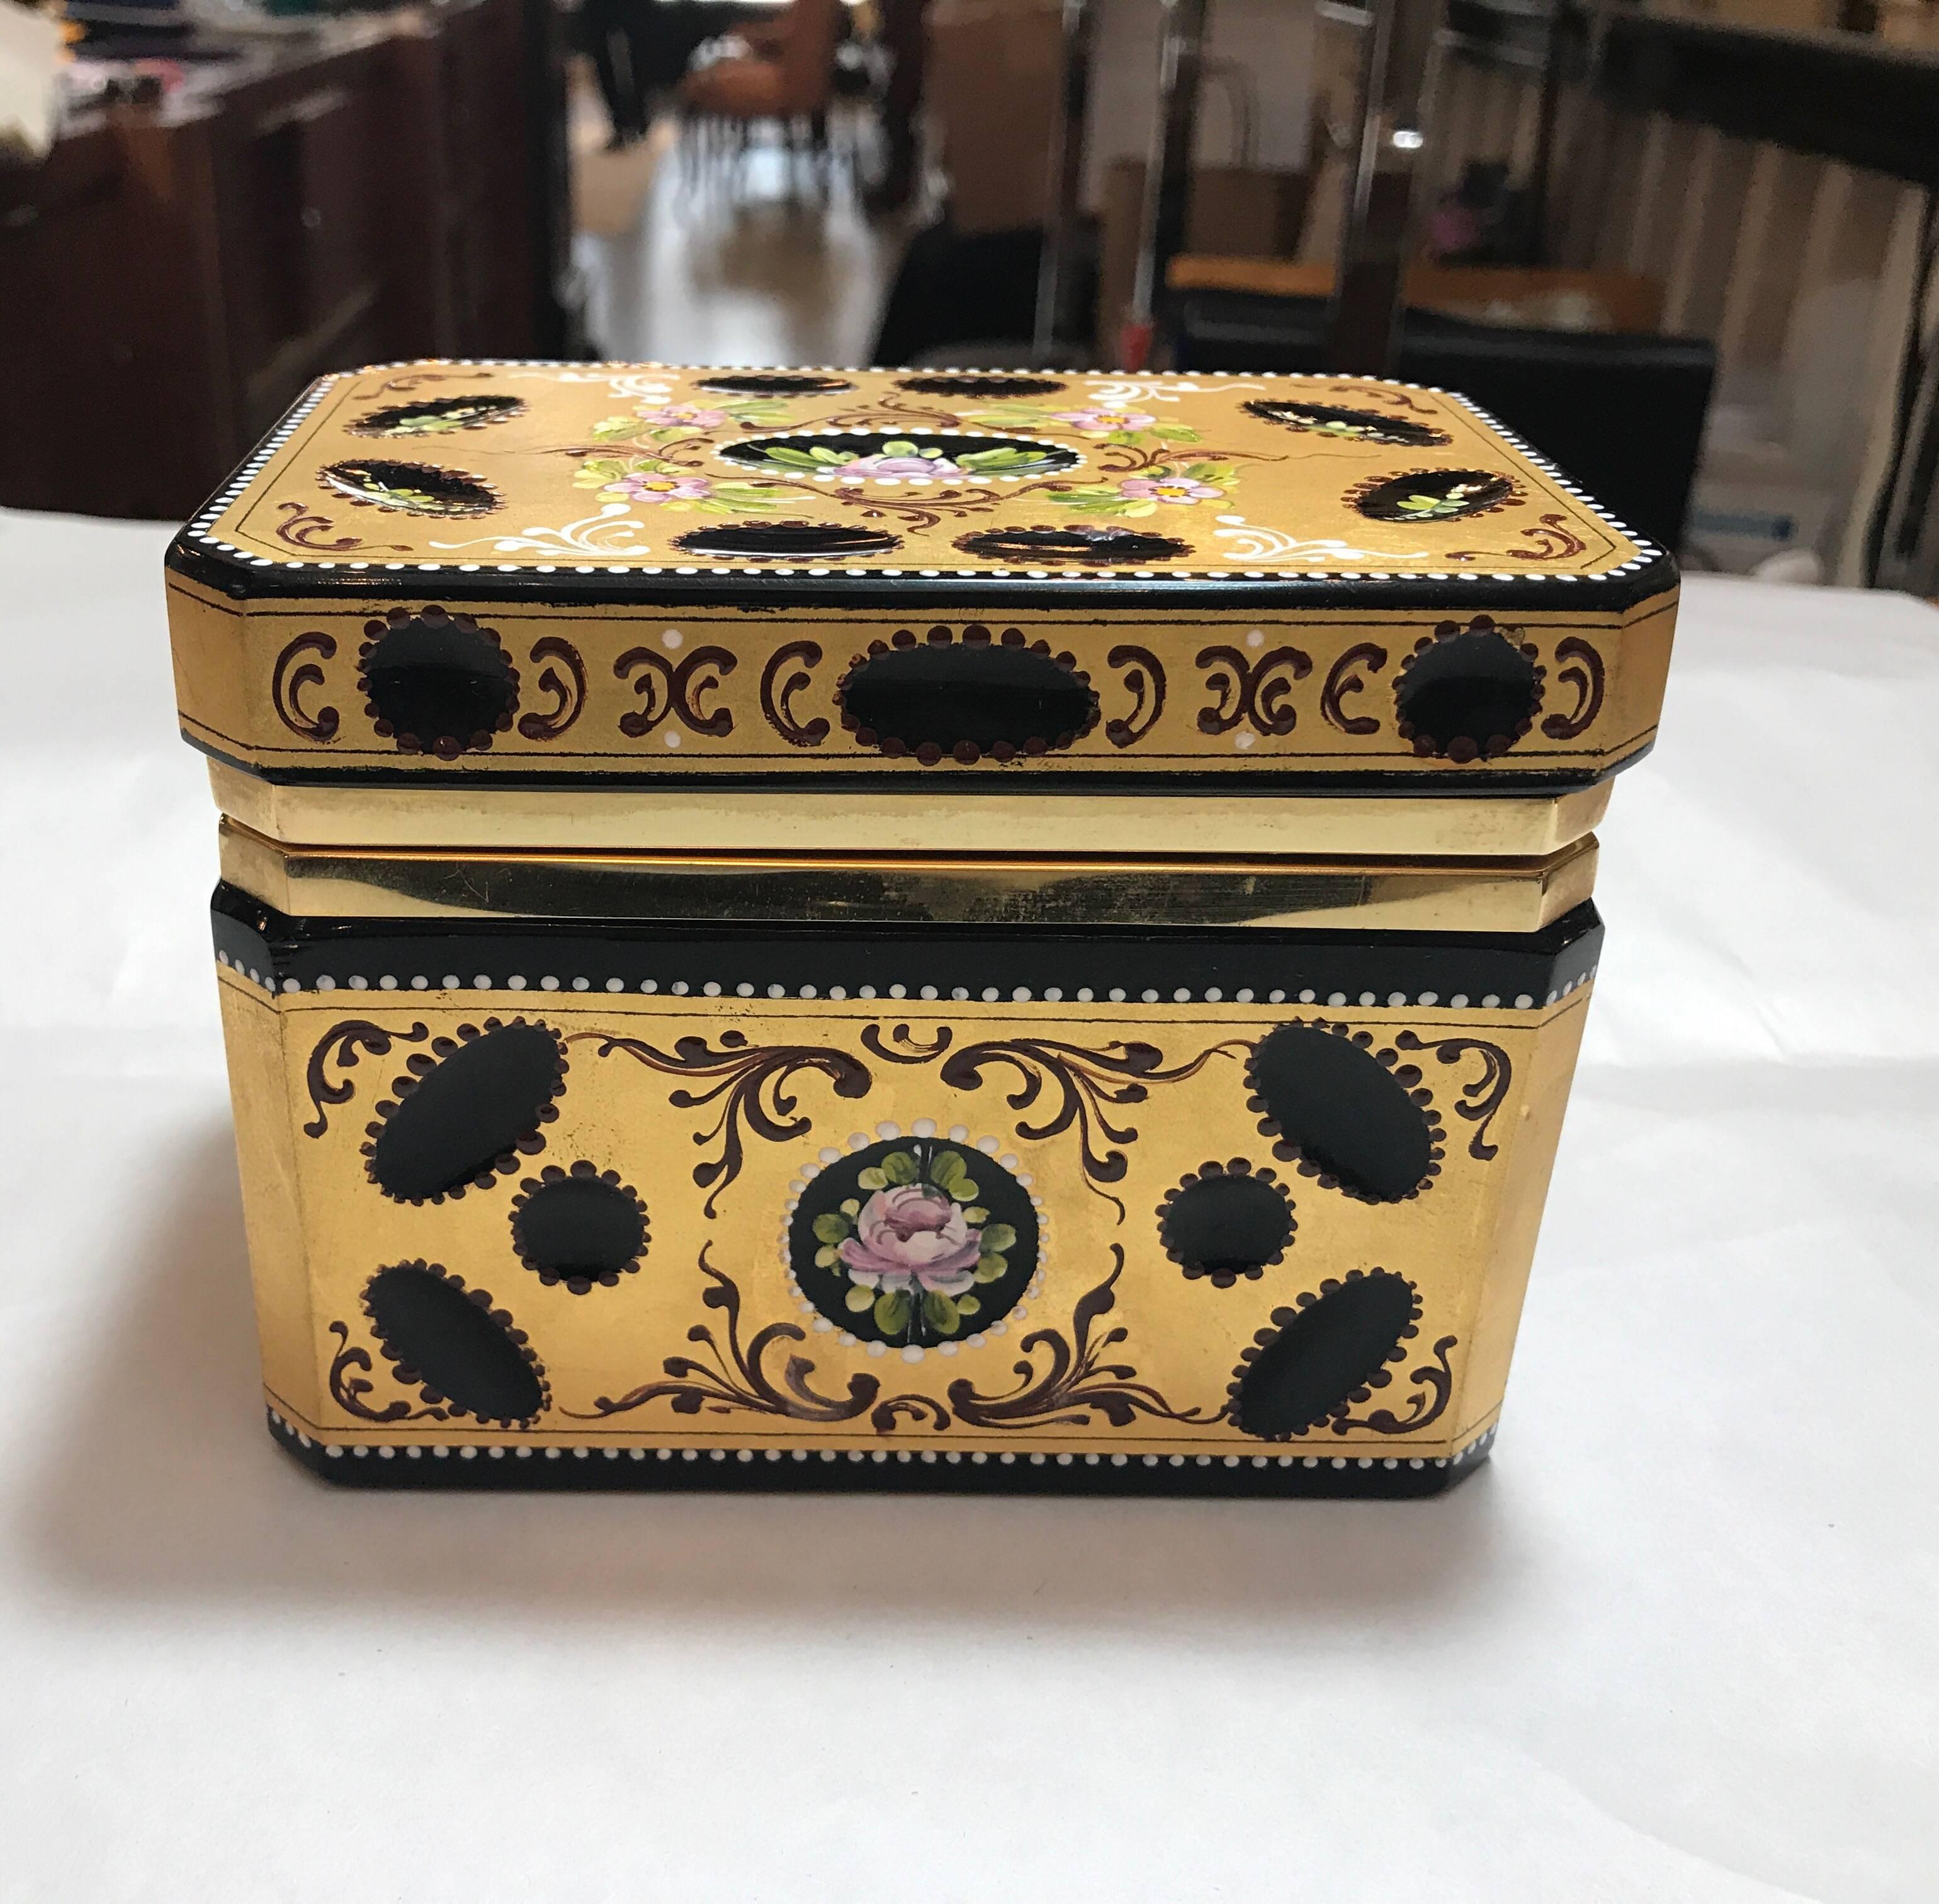 Opulent gilt and enameled onyx glass hinged table box. Elegant floral cartouches with heavy gilt surround and enameled bead work.